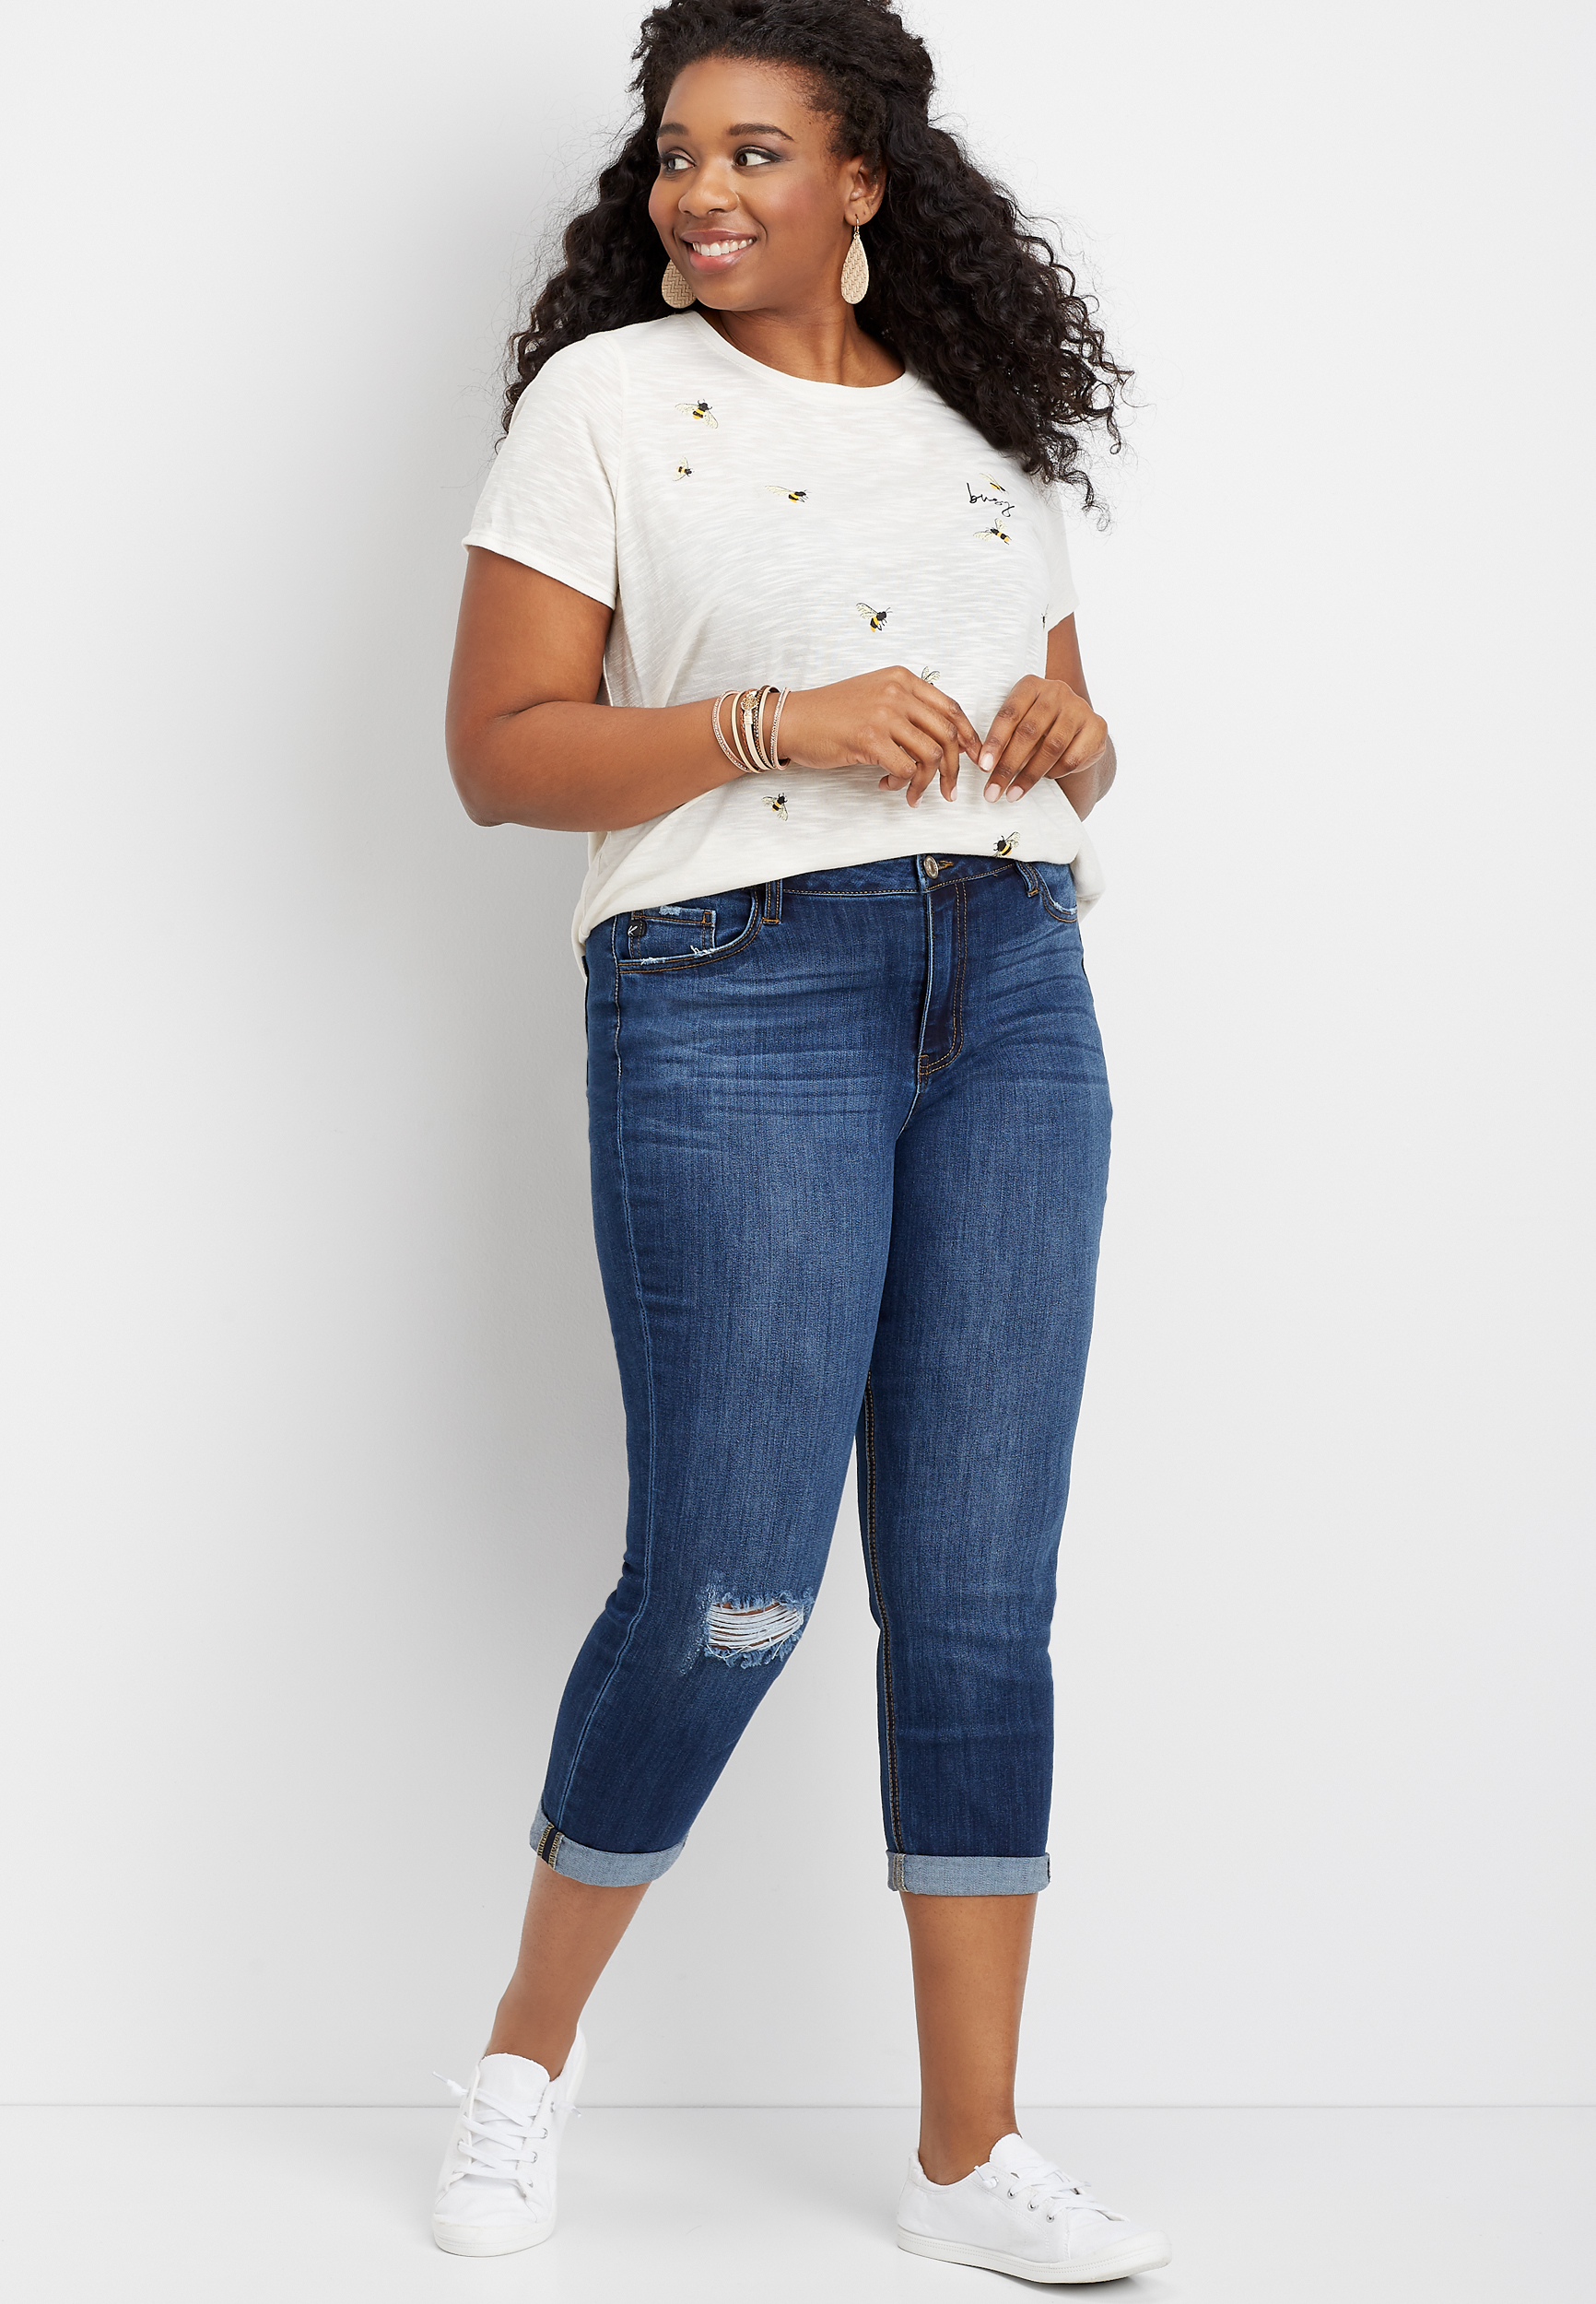 Plus Size KanCan™ High Rise Destructed Cropped Jean | maurices